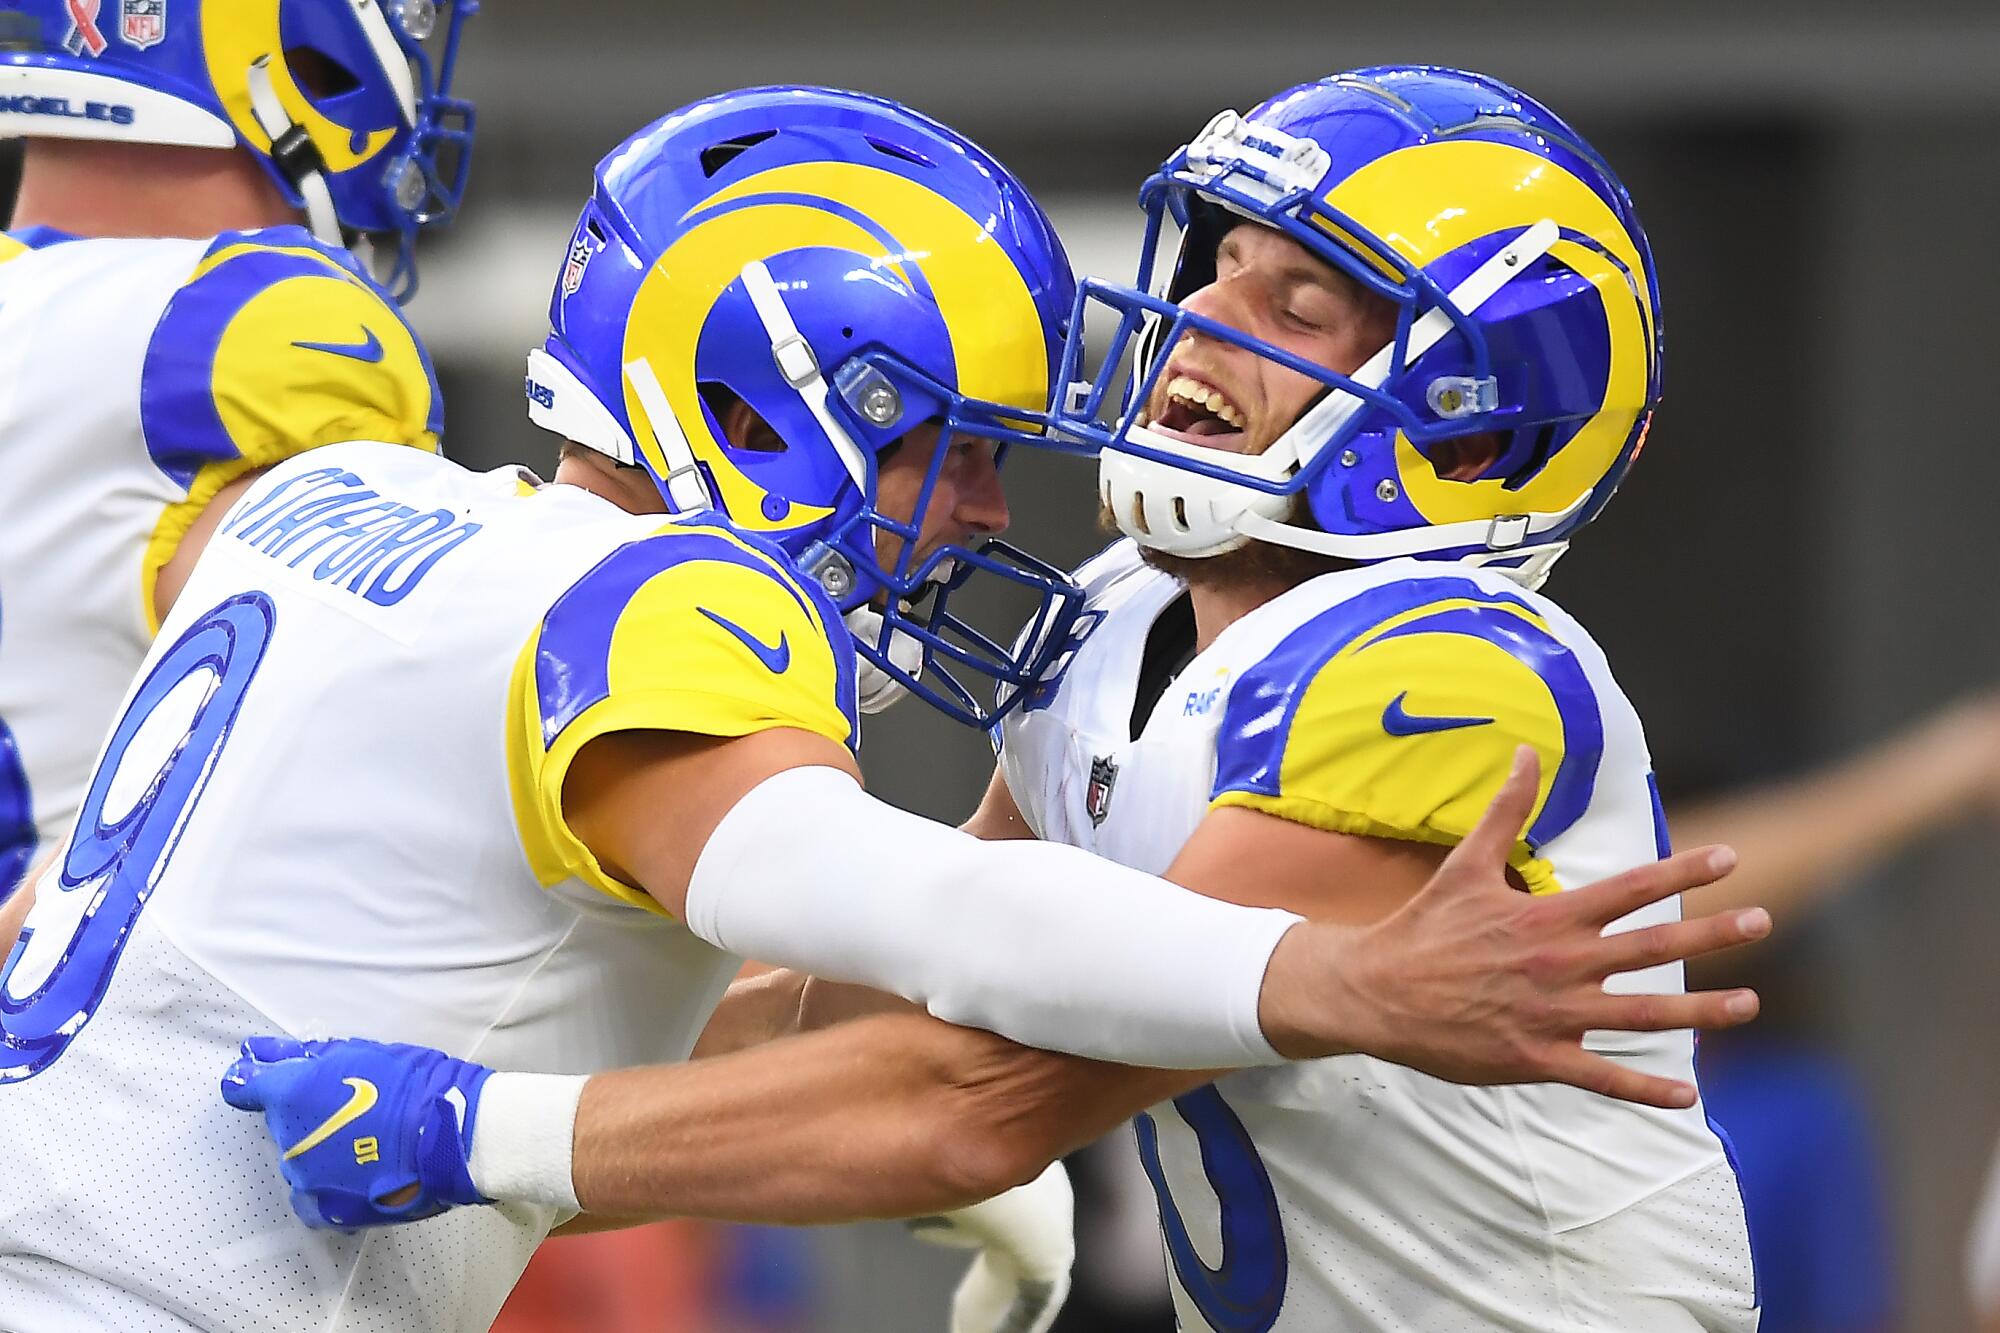 Rams quarterback Matthew Stafford, left, celebrates his touchdown pass with wide receiver Cooper Kupp.